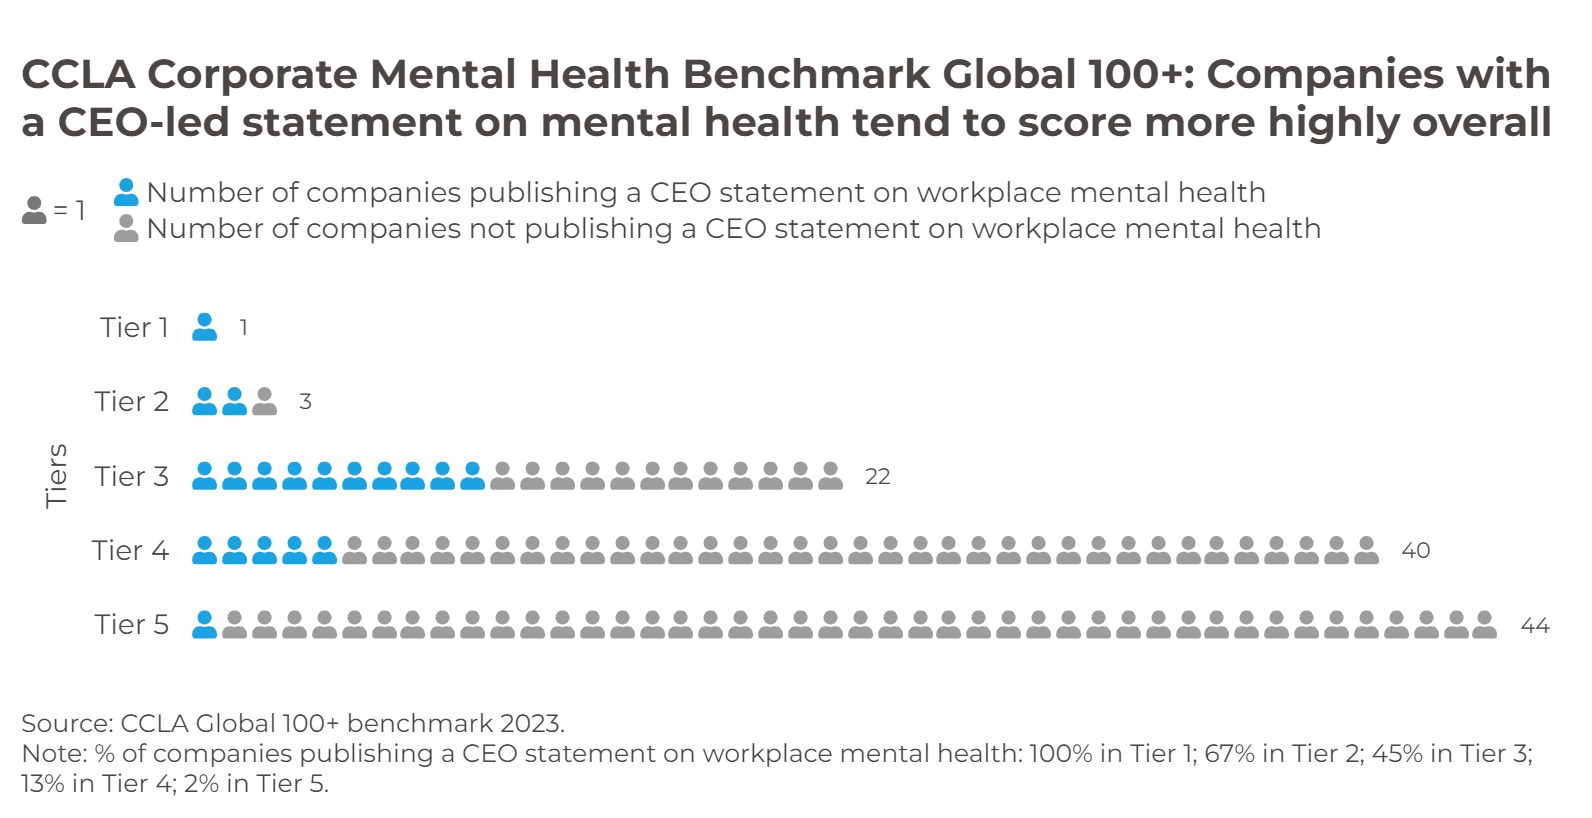 Chart showing companies with a CEO-led statement on mental health tend to score more highly overall